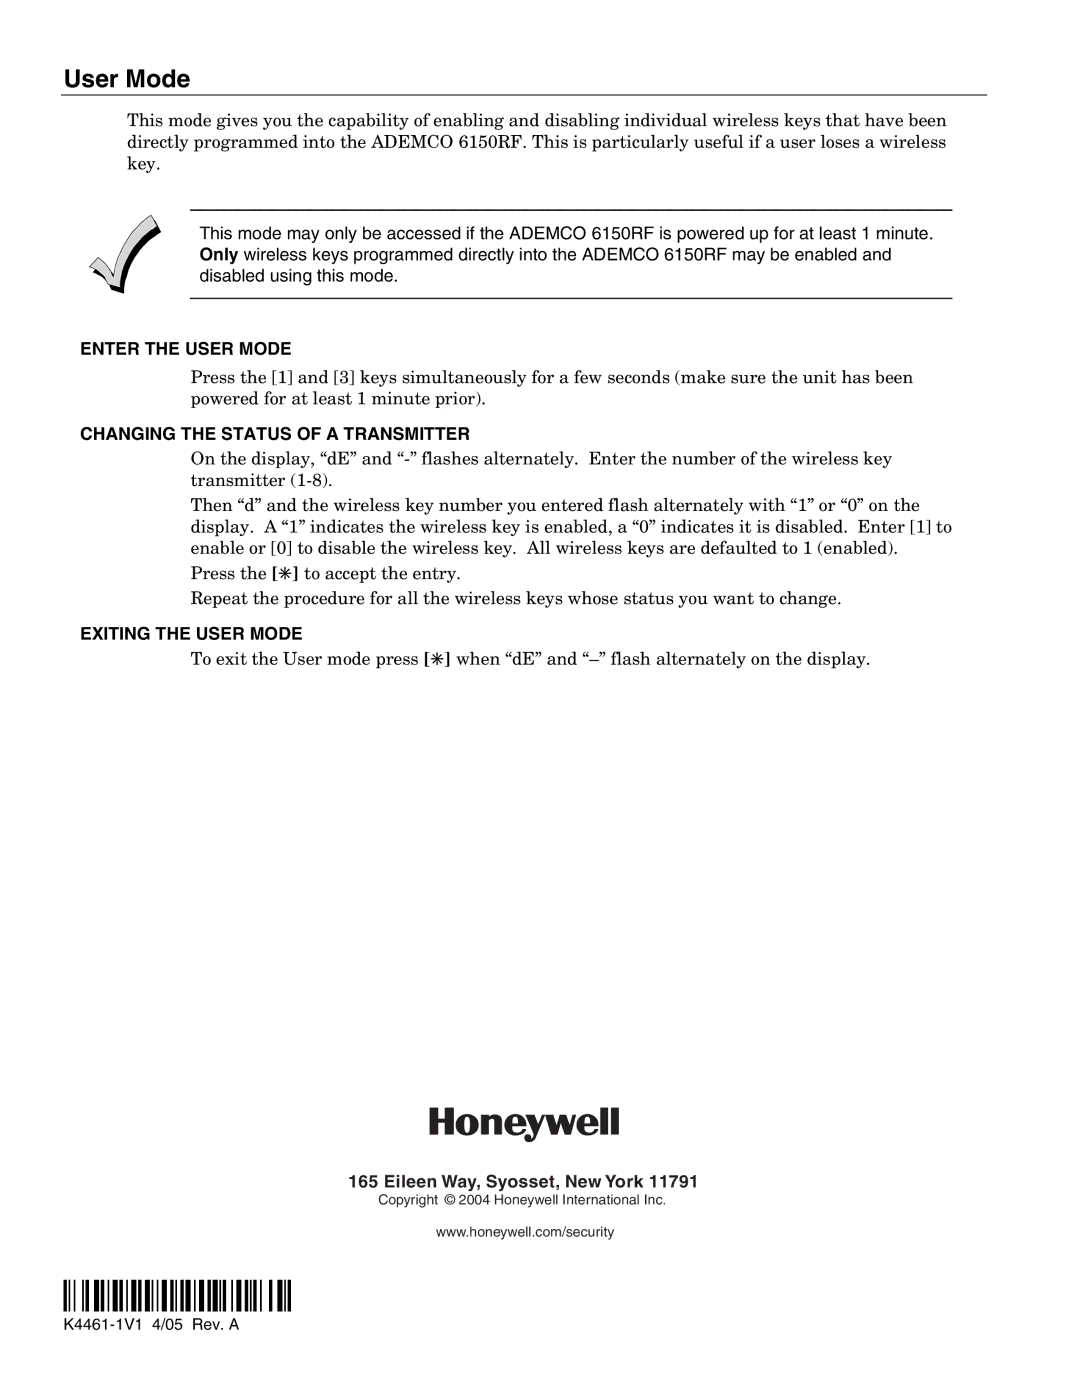 Honeywell 6150RF manual Enter the User Mode, Changing the Status of a Transmitter, Exiting the User Mode 